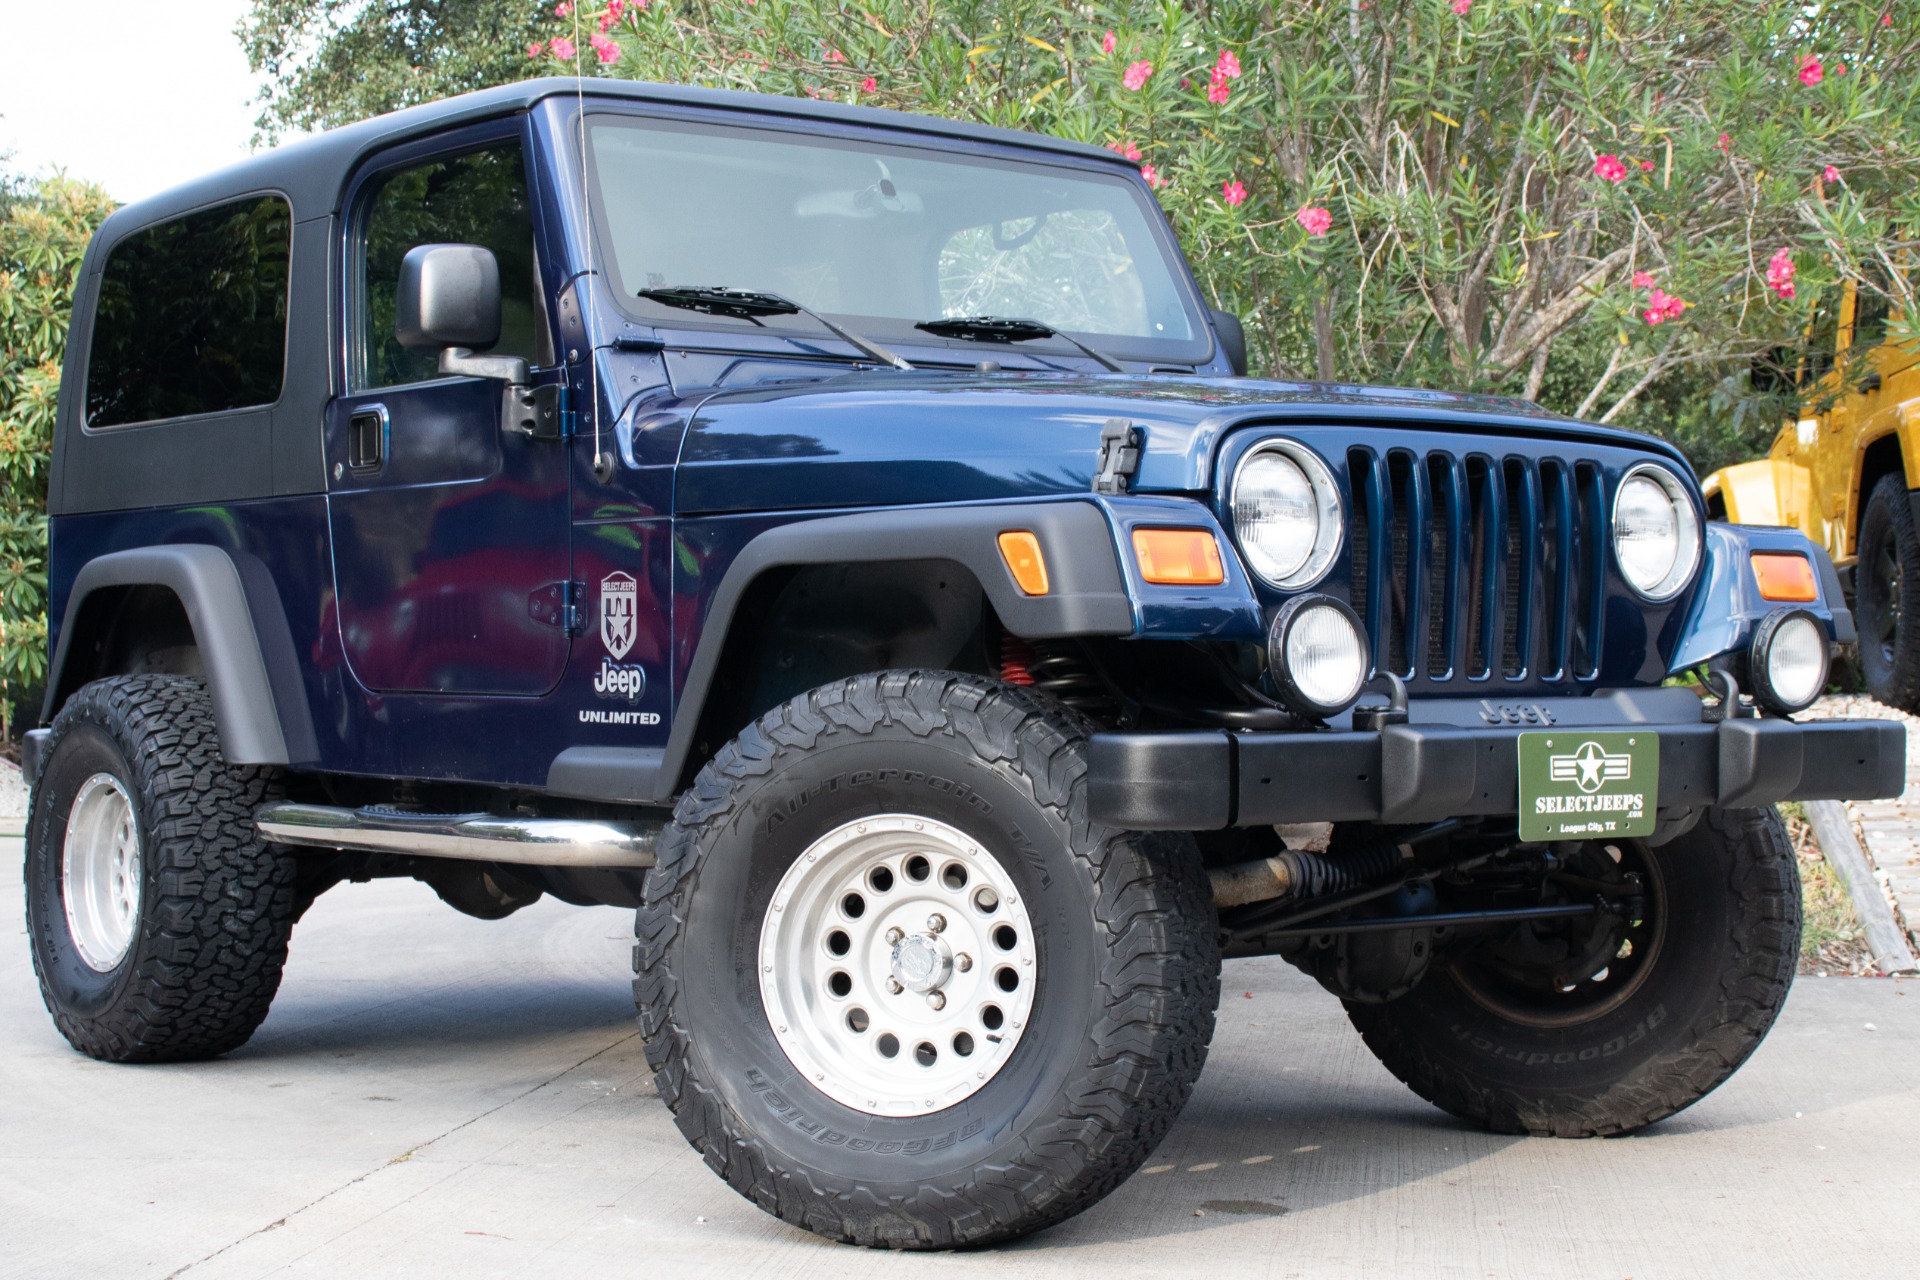 Used 2004 Jeep Wrangler Unlimited For Sale ($16,995) | Select Jeeps Inc.  Stock #793776